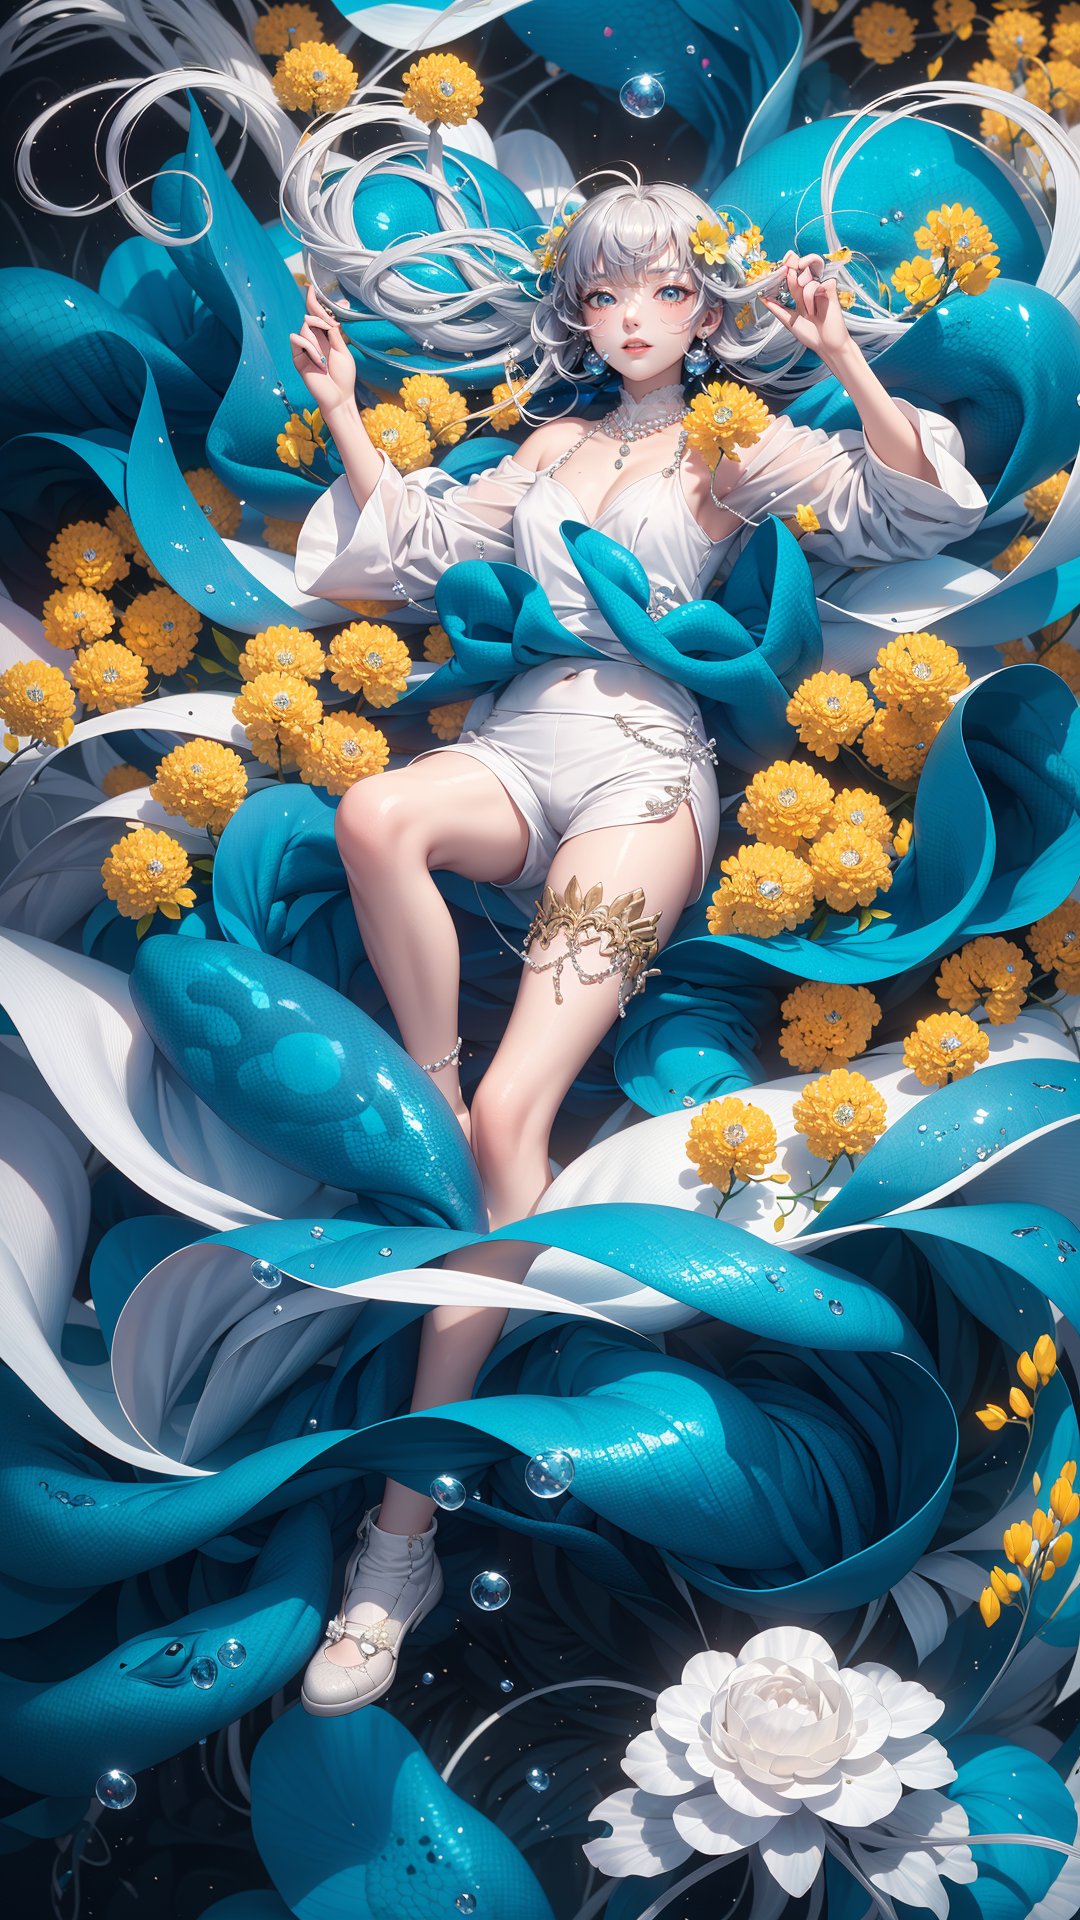 Best quality, (masterpiece: 1.2), (detail: 1.15), whole body, best quality, white field, 1 girl, fish, long hair, solo, white hydrangea, looking at the audience, pink eyes, floating hair, long sleeves, foam, white hair, bubbles, shoes, white shoes, white snakes, corals, smiles, shells, underwater, super long hair, yellow flowers, jellyfish, pearls, orange flowers, white shorts, Orange theme, parted lips, white theme, frogs, animals, hollowed out stockings, white dress

